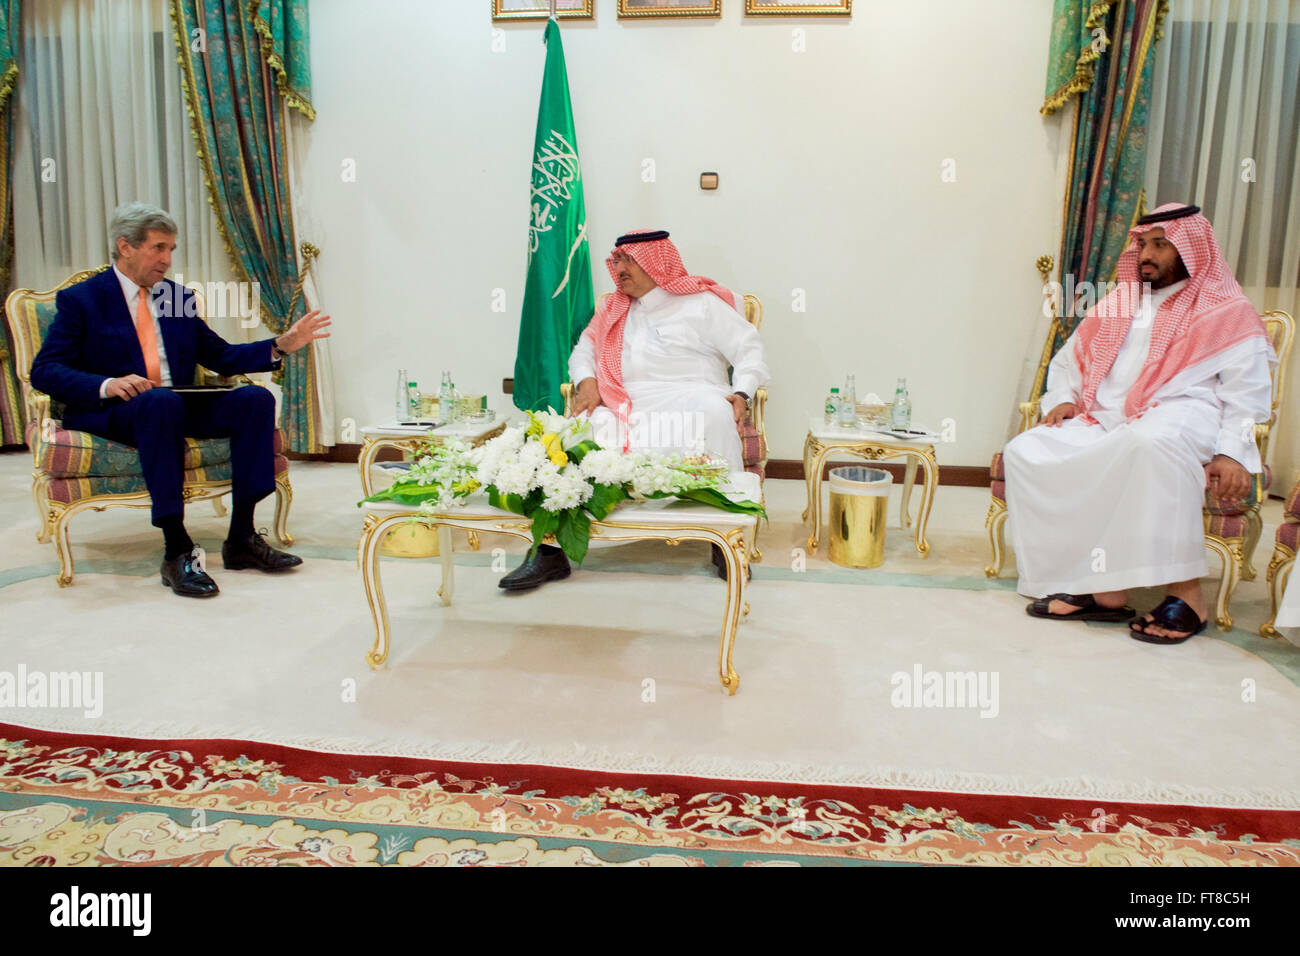 U.S. Secretary of State John Kerry sits with Saudi Arabia Crown Prince Muhammad bin Nayef and Deputy Crown Prince Mohammed bin Salman on March 11, 2016, at King Khalid Military City outside Hafr al-Batin, Saudi Arabia, before a trlateral meeting also attended by Foreign Minister Adel al-Jubeir. [State Department Photo/Public Domain] Stock Photo